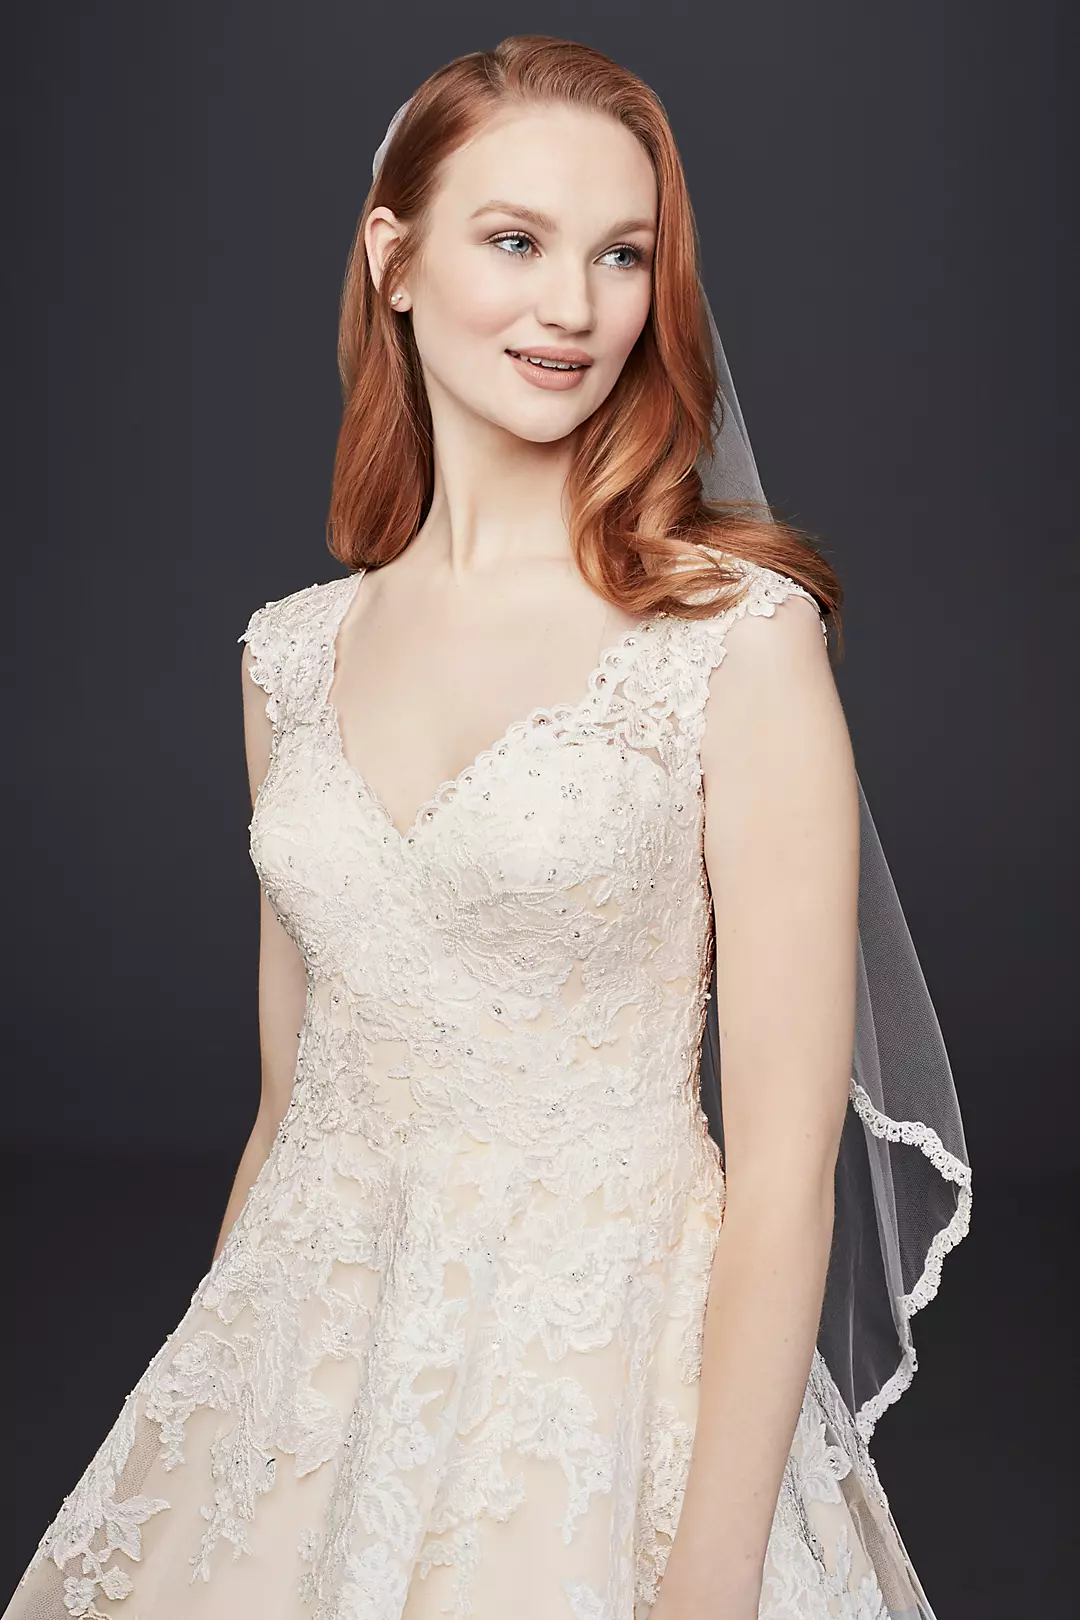 As-Is Scalloped V-Neck Tulle Wedding Dress Image 3